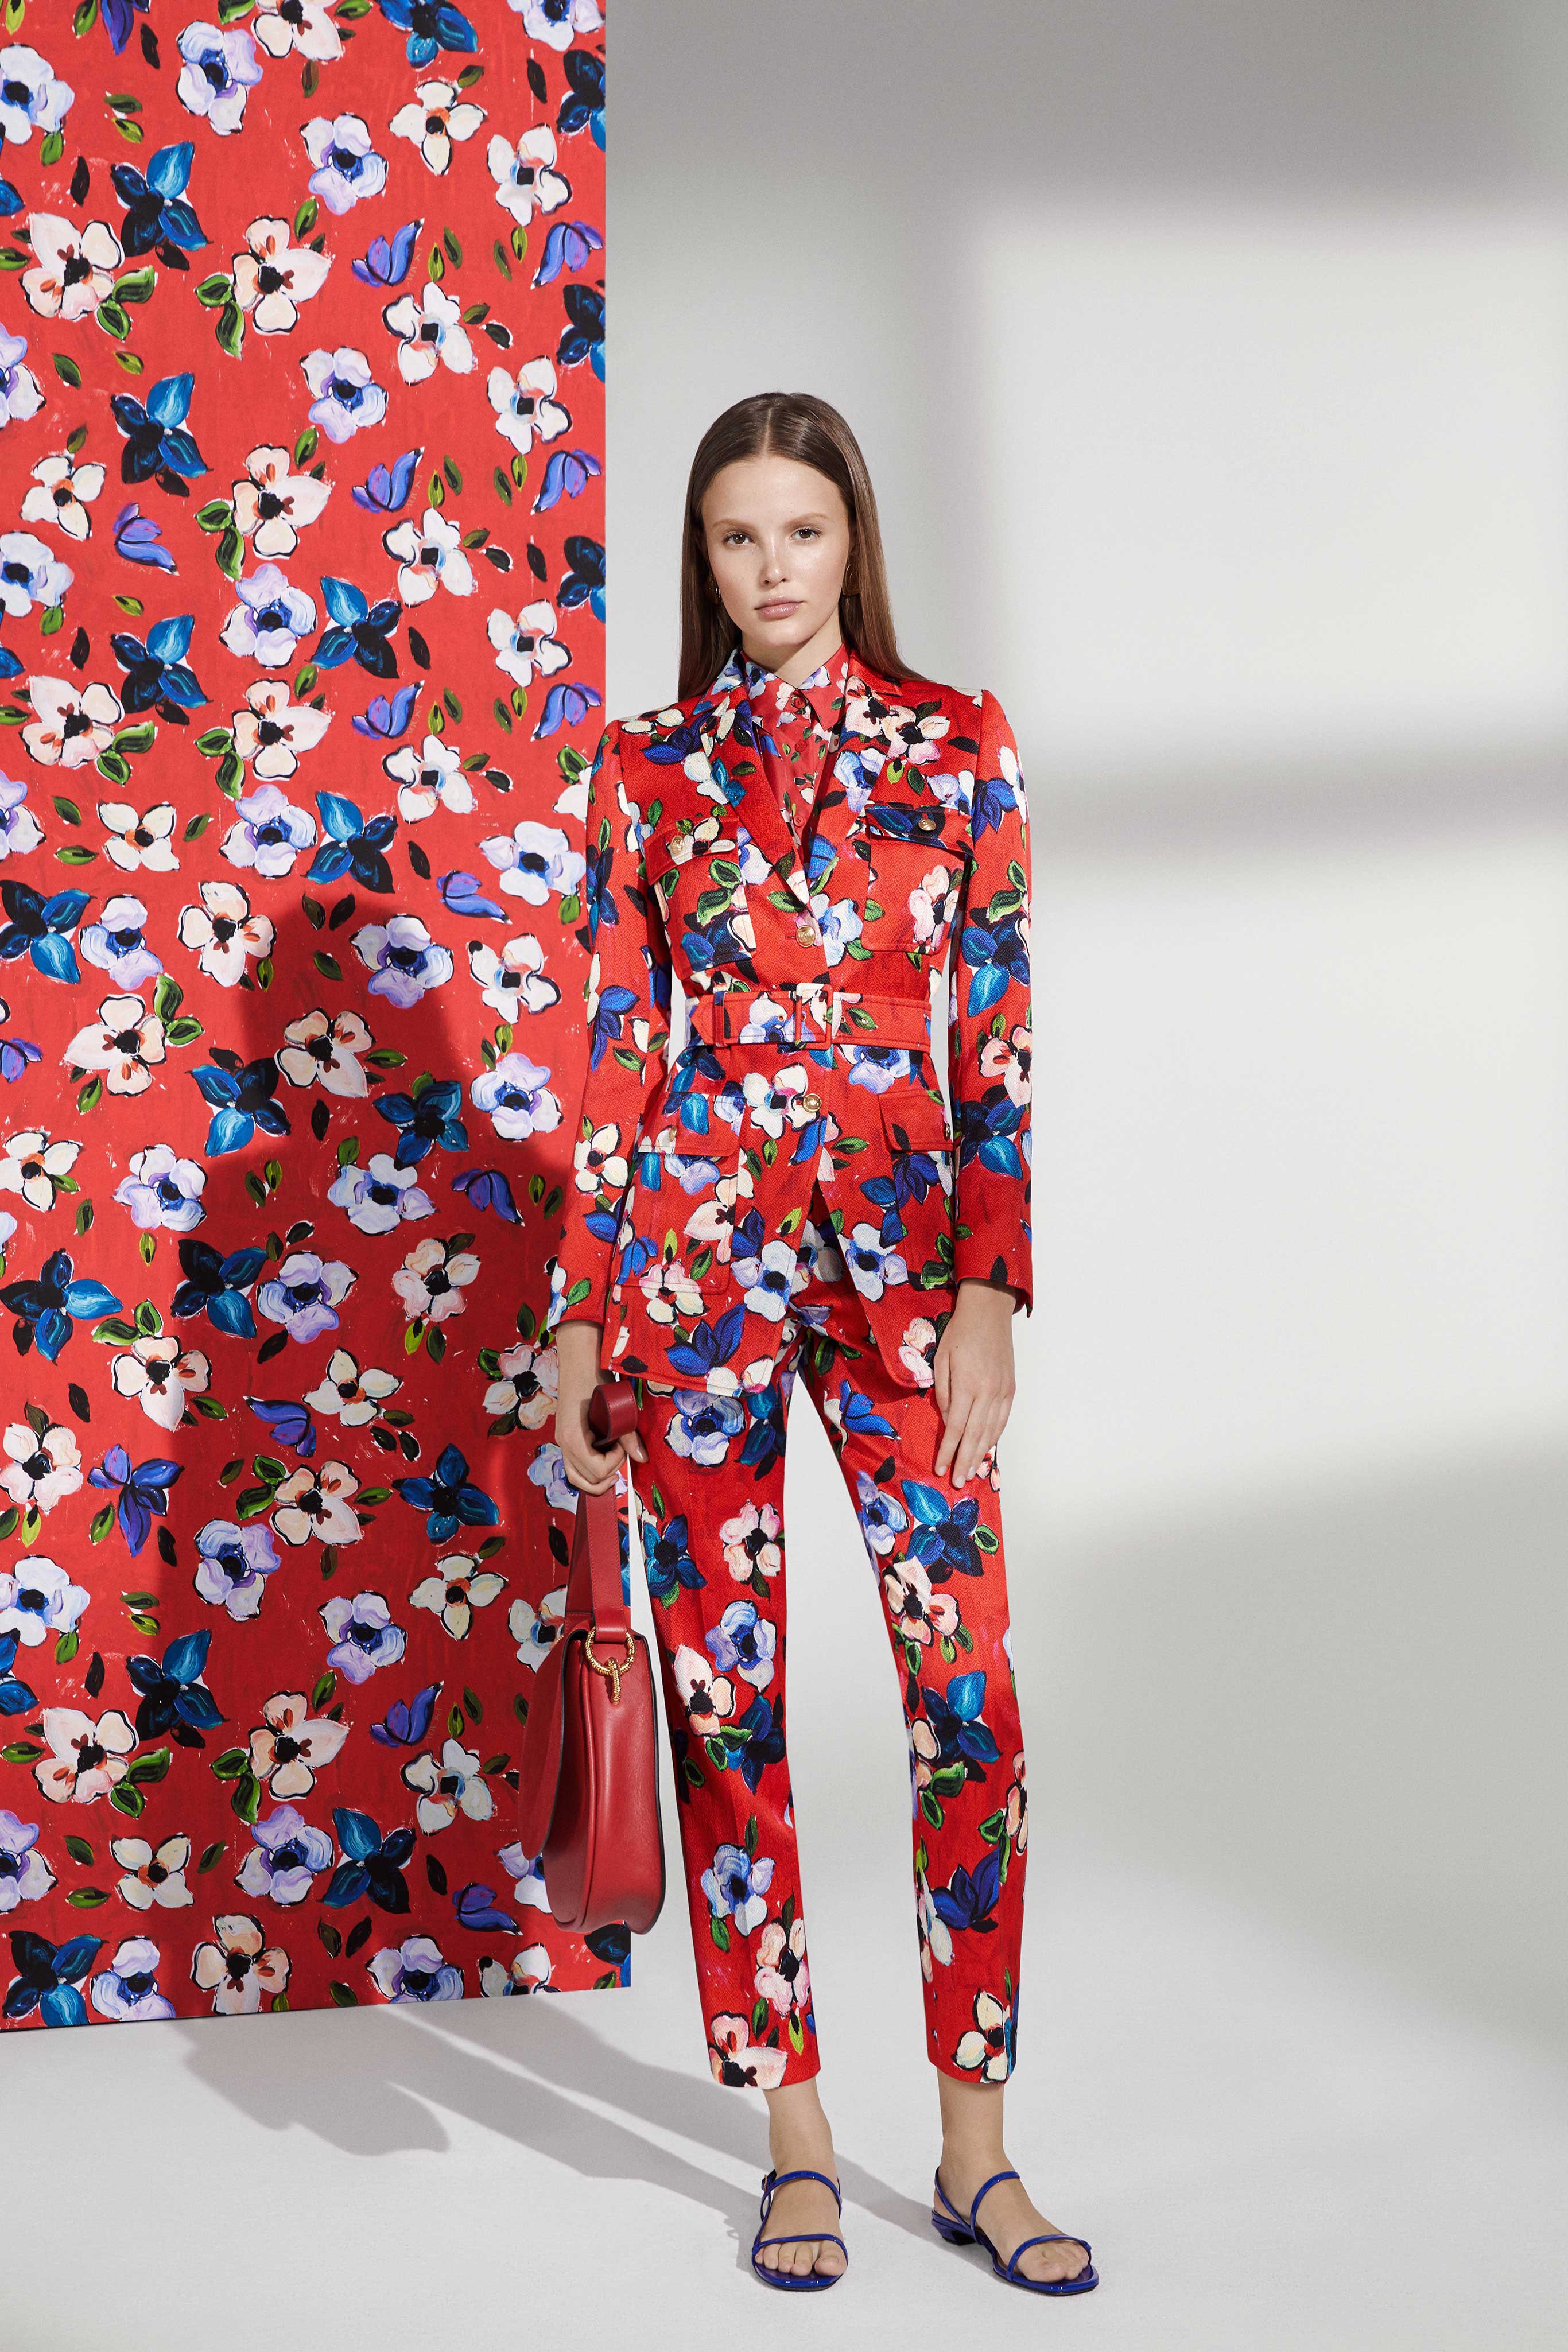 Three Looks From the Resort 2019 Collections